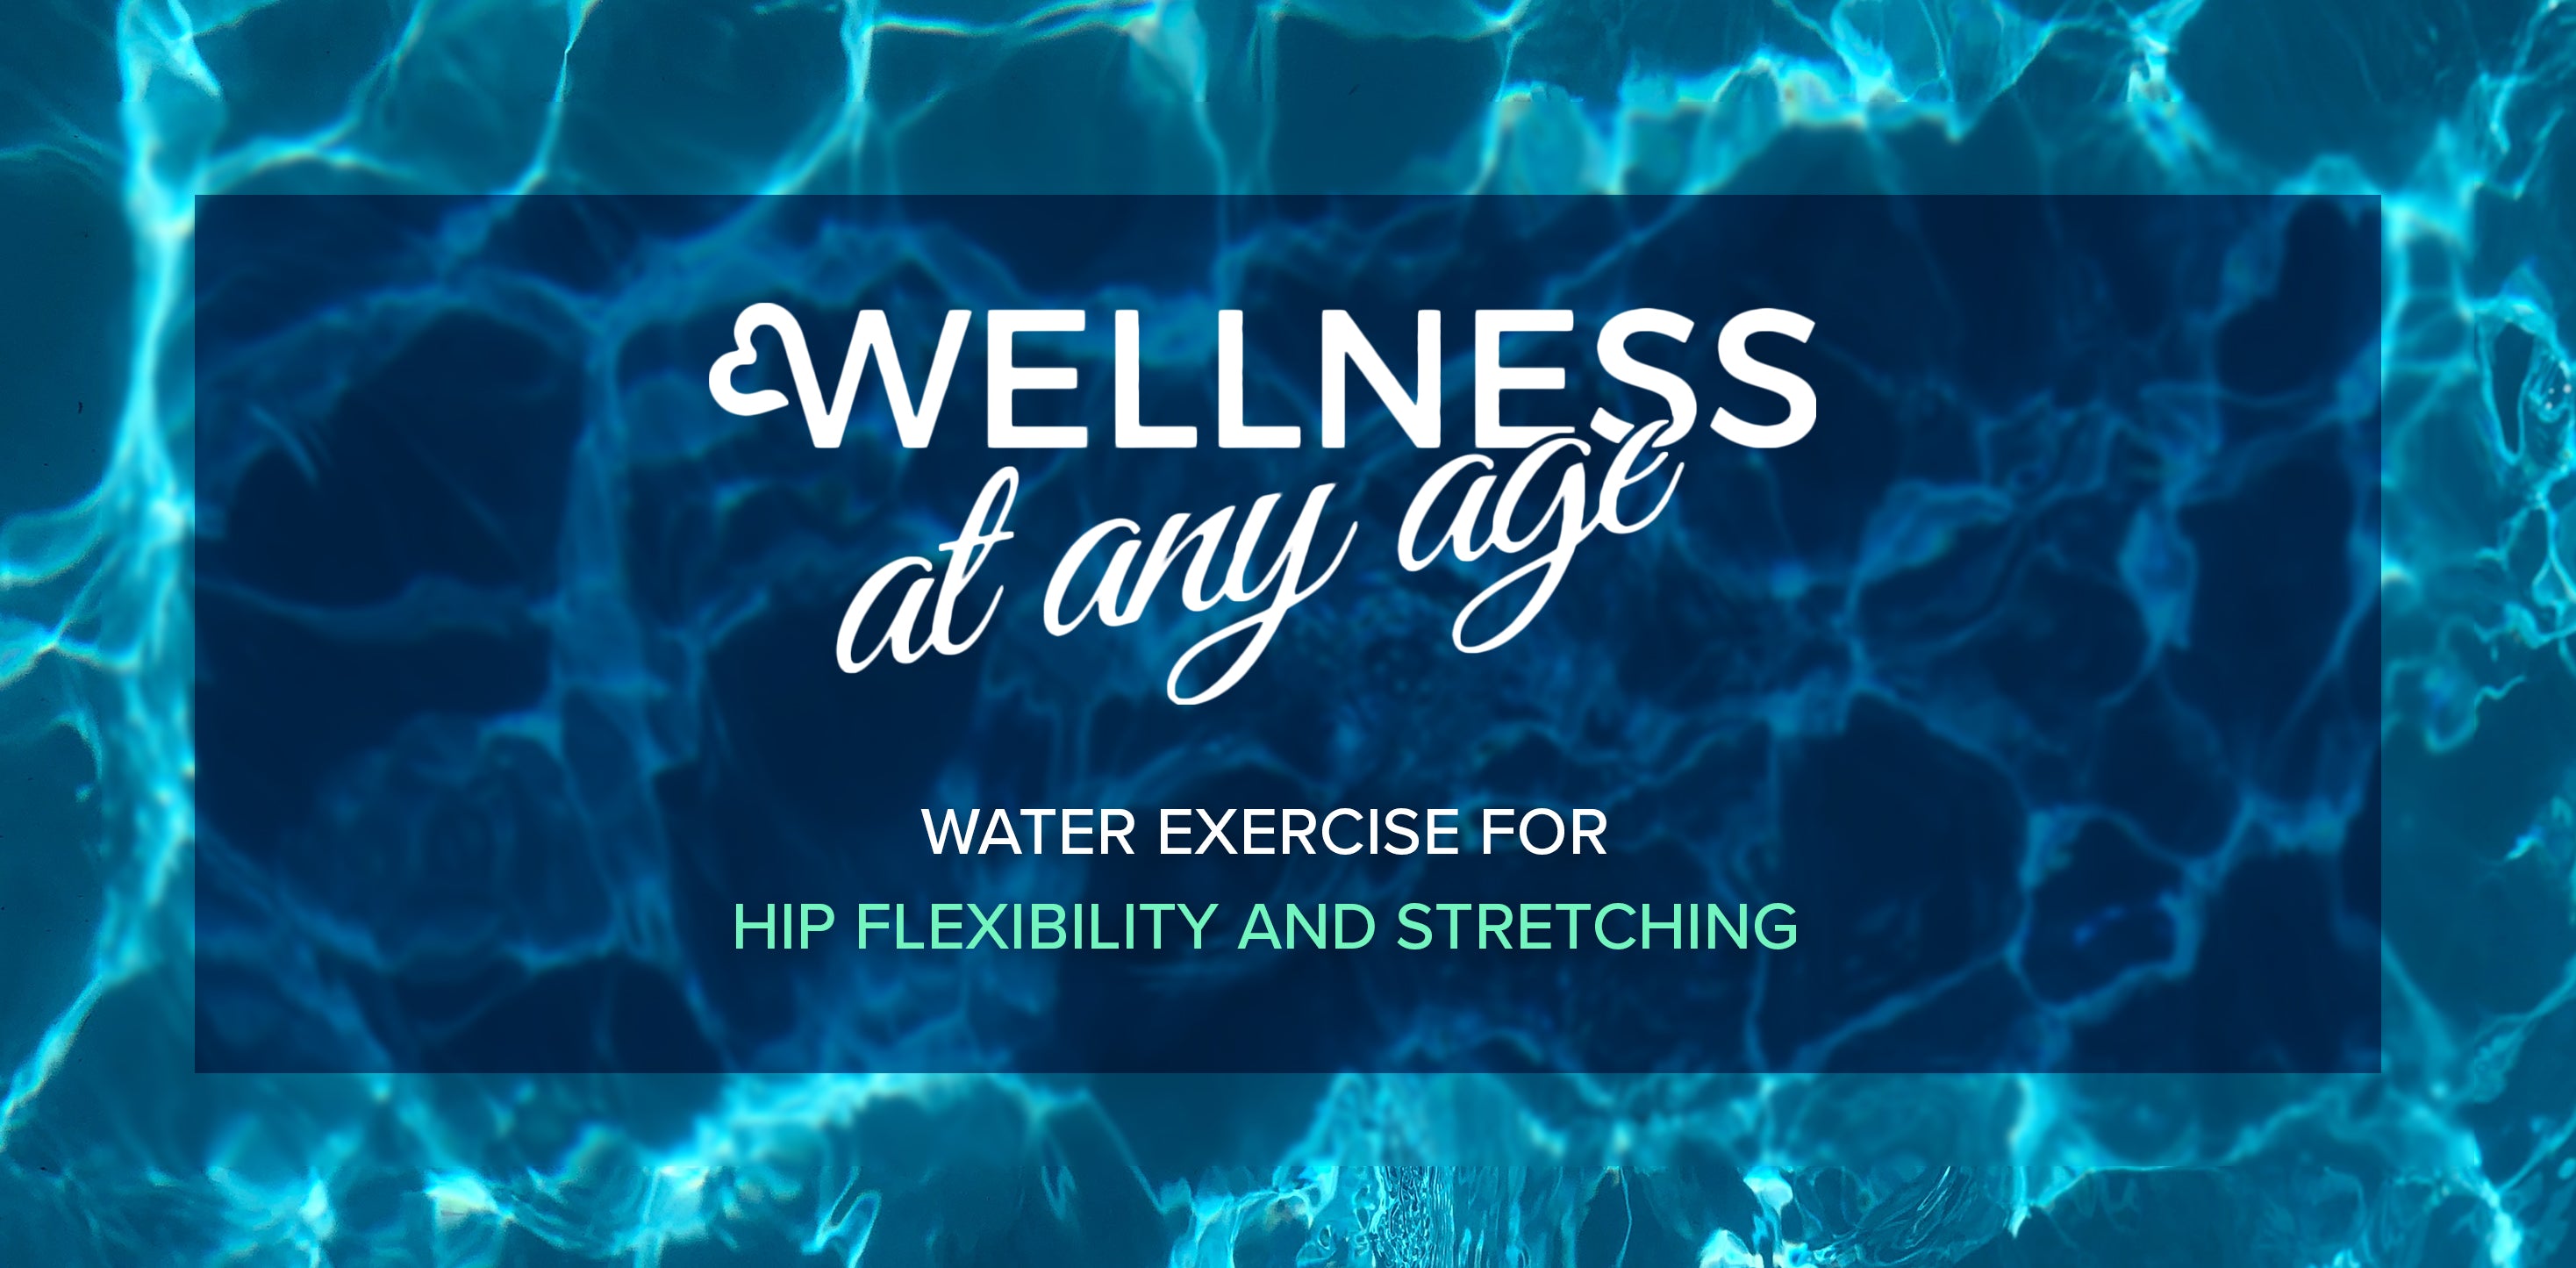 Hip Flexibility and Stretching - Water Exercise